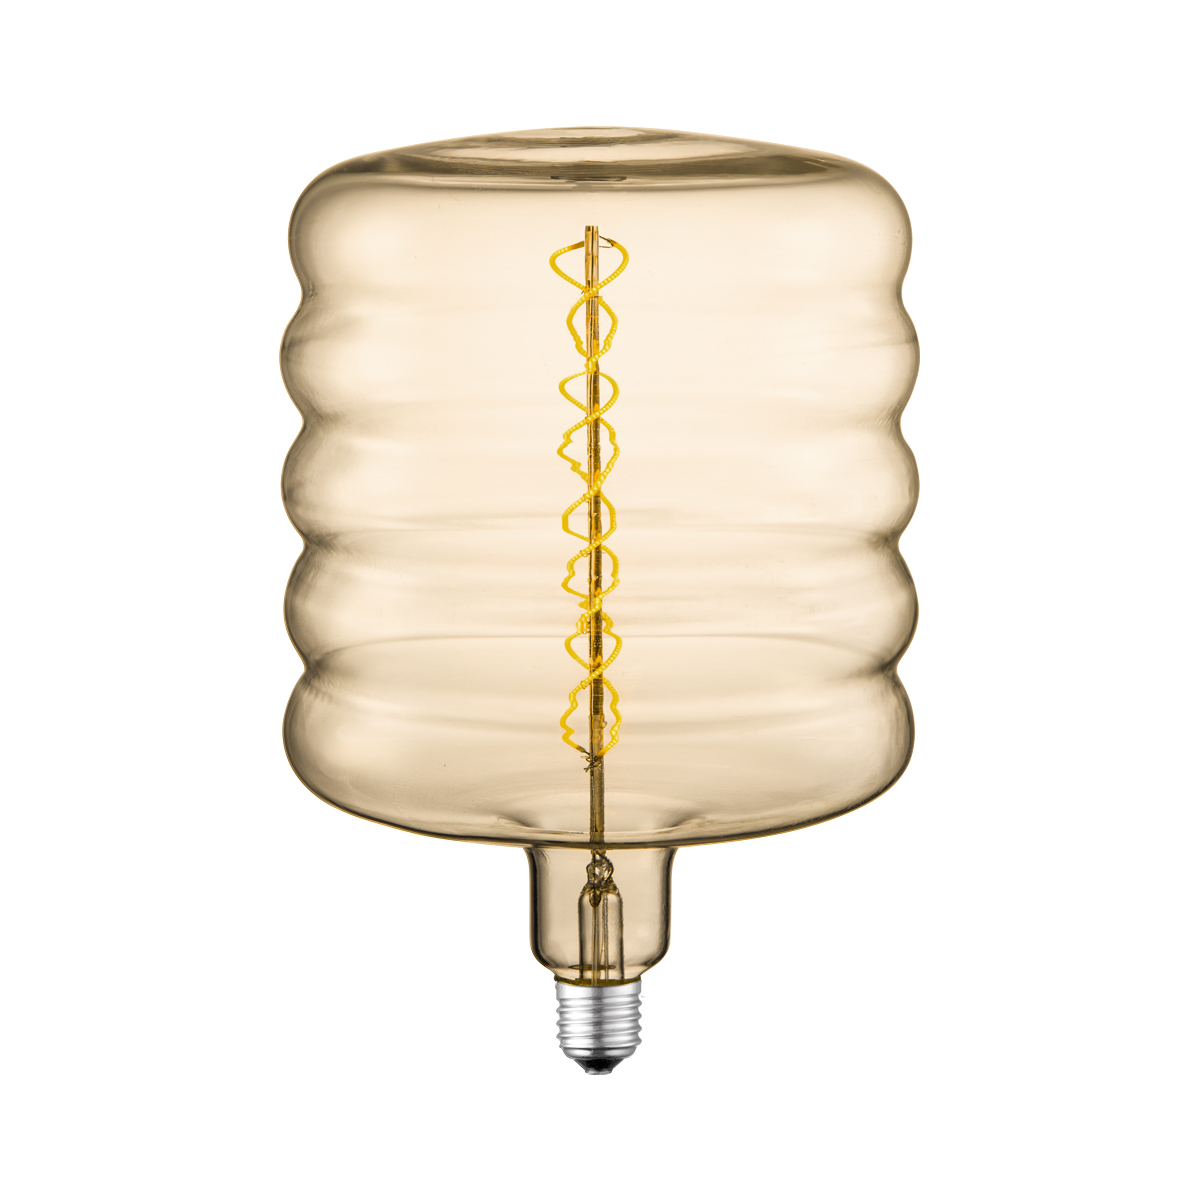 Tangla lighting - TLB-8102-06AM - LED Light Bulb Double Spiral filament - special 4W amber - bucket - dimmable - E27